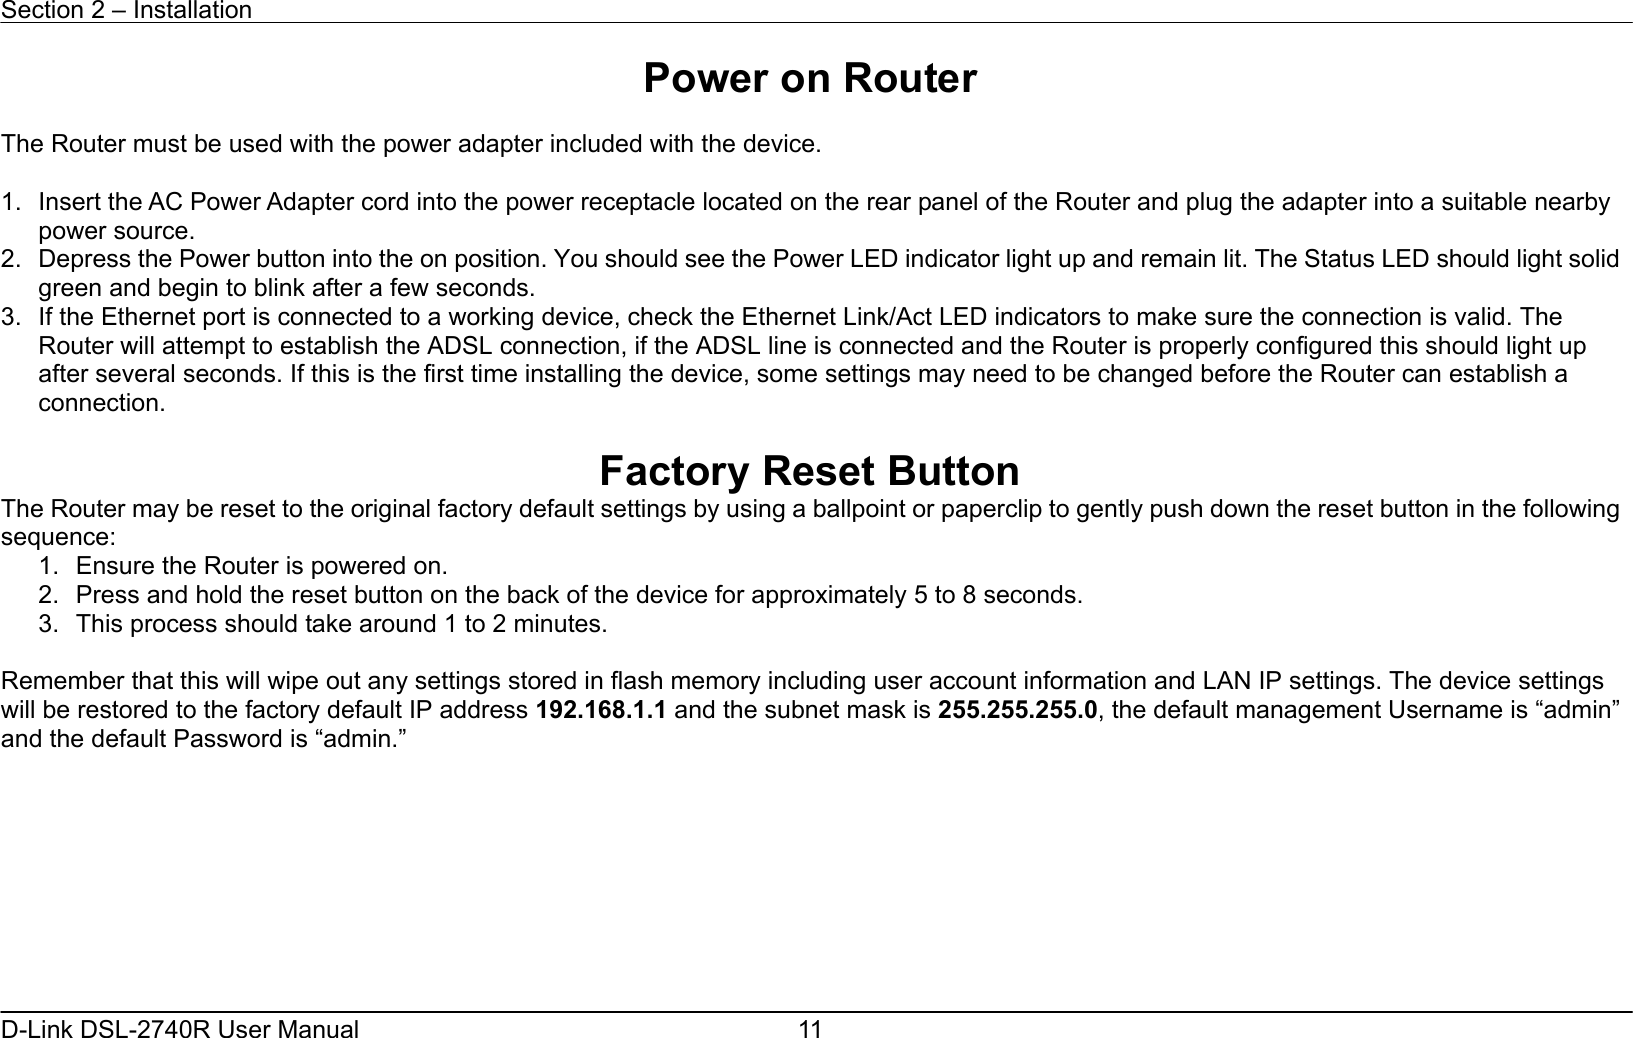 Section 2 – Installation   D-Link DSL-2740R User Manual  11Power on Router  The Router must be used with the power adapter included with the device.  1.  Insert the AC Power Adapter cord into the power receptacle located on the rear panel of the Router and plug the adapter into a suitable nearby power source. 2.  Depress the Power button into the on position. You should see the Power LED indicator light up and remain lit. The Status LED should light solid green and begin to blink after a few seconds. 3.  If the Ethernet port is connected to a working device, check the Ethernet Link/Act LED indicators to make sure the connection is valid. The Router will attempt to establish the ADSL connection, if the ADSL line is connected and the Router is properly configured this should light up after several seconds. If this is the first time installing the device, some settings may need to be changed before the Router can establish a connection.    Factory Reset Button The Router may be reset to the original factory default settings by using a ballpoint or paperclip to gently push down the reset button in the following sequence:  1.  Ensure the Router is powered on. 2.  Press and hold the reset button on the back of the device for approximately 5 to 8 seconds. 3.  This process should take around 1 to 2 minutes.    Remember that this will wipe out any settings stored in flash memory including user account information and LAN IP settings. The device settings will be restored to the factory default IP address 192.168.1.1 and the subnet mask is 255.255.255.0, the default management Username is “admin” and the default Password is “admin.”         